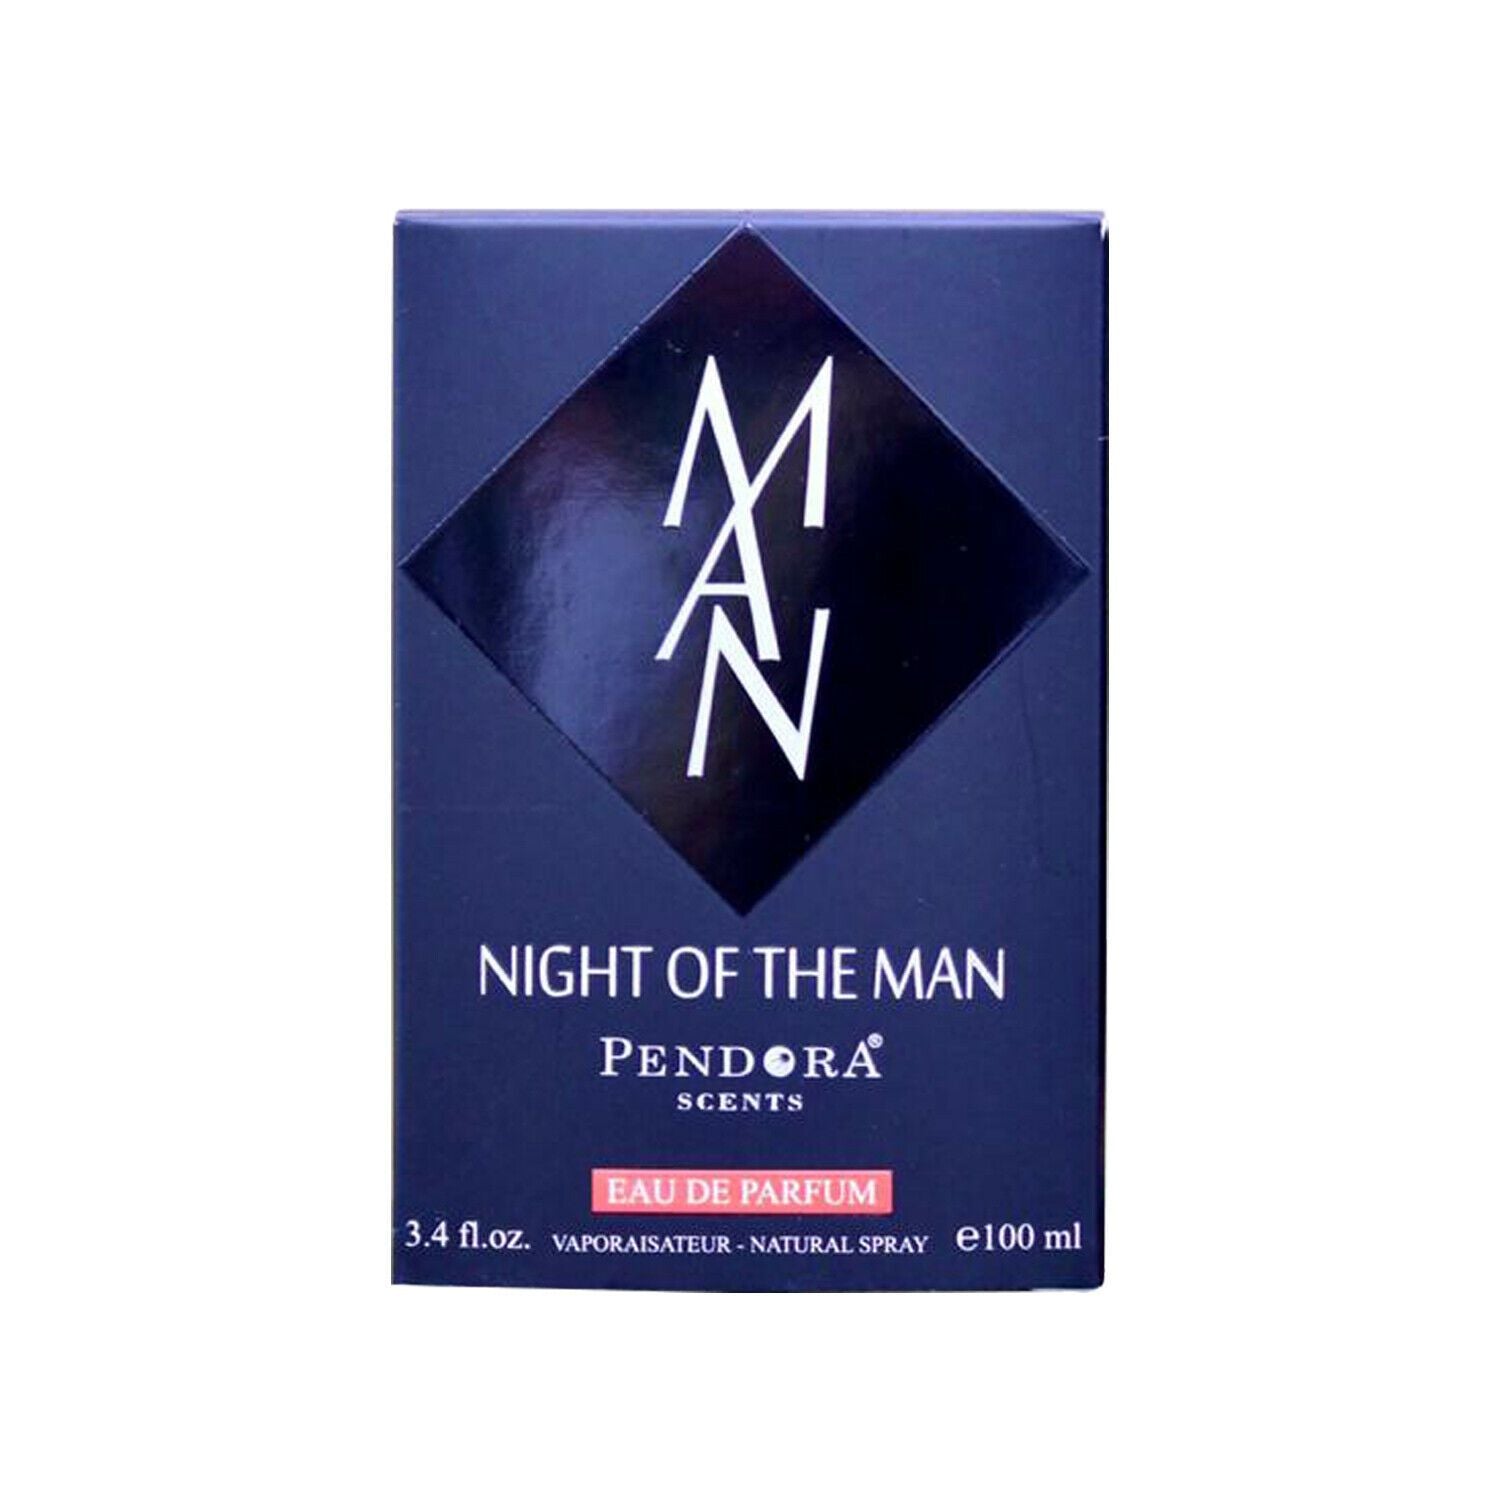 NIGHT OF THE MAN - Spicy Fragrance Specially designed for Men